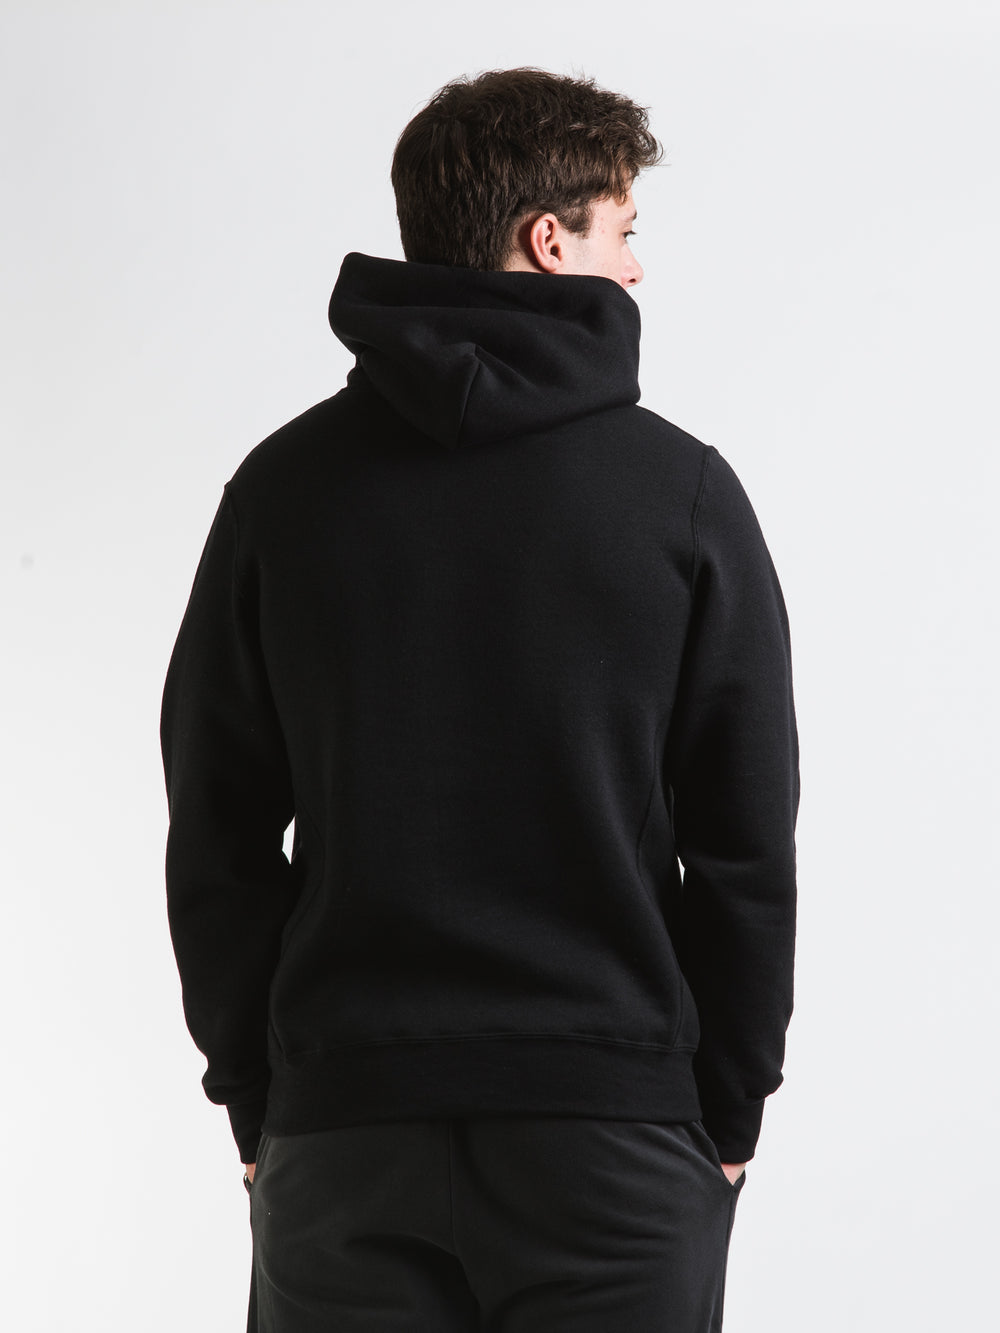 RUSSELL ALABAMA PULLOVER HOODIE - CLEARANCE